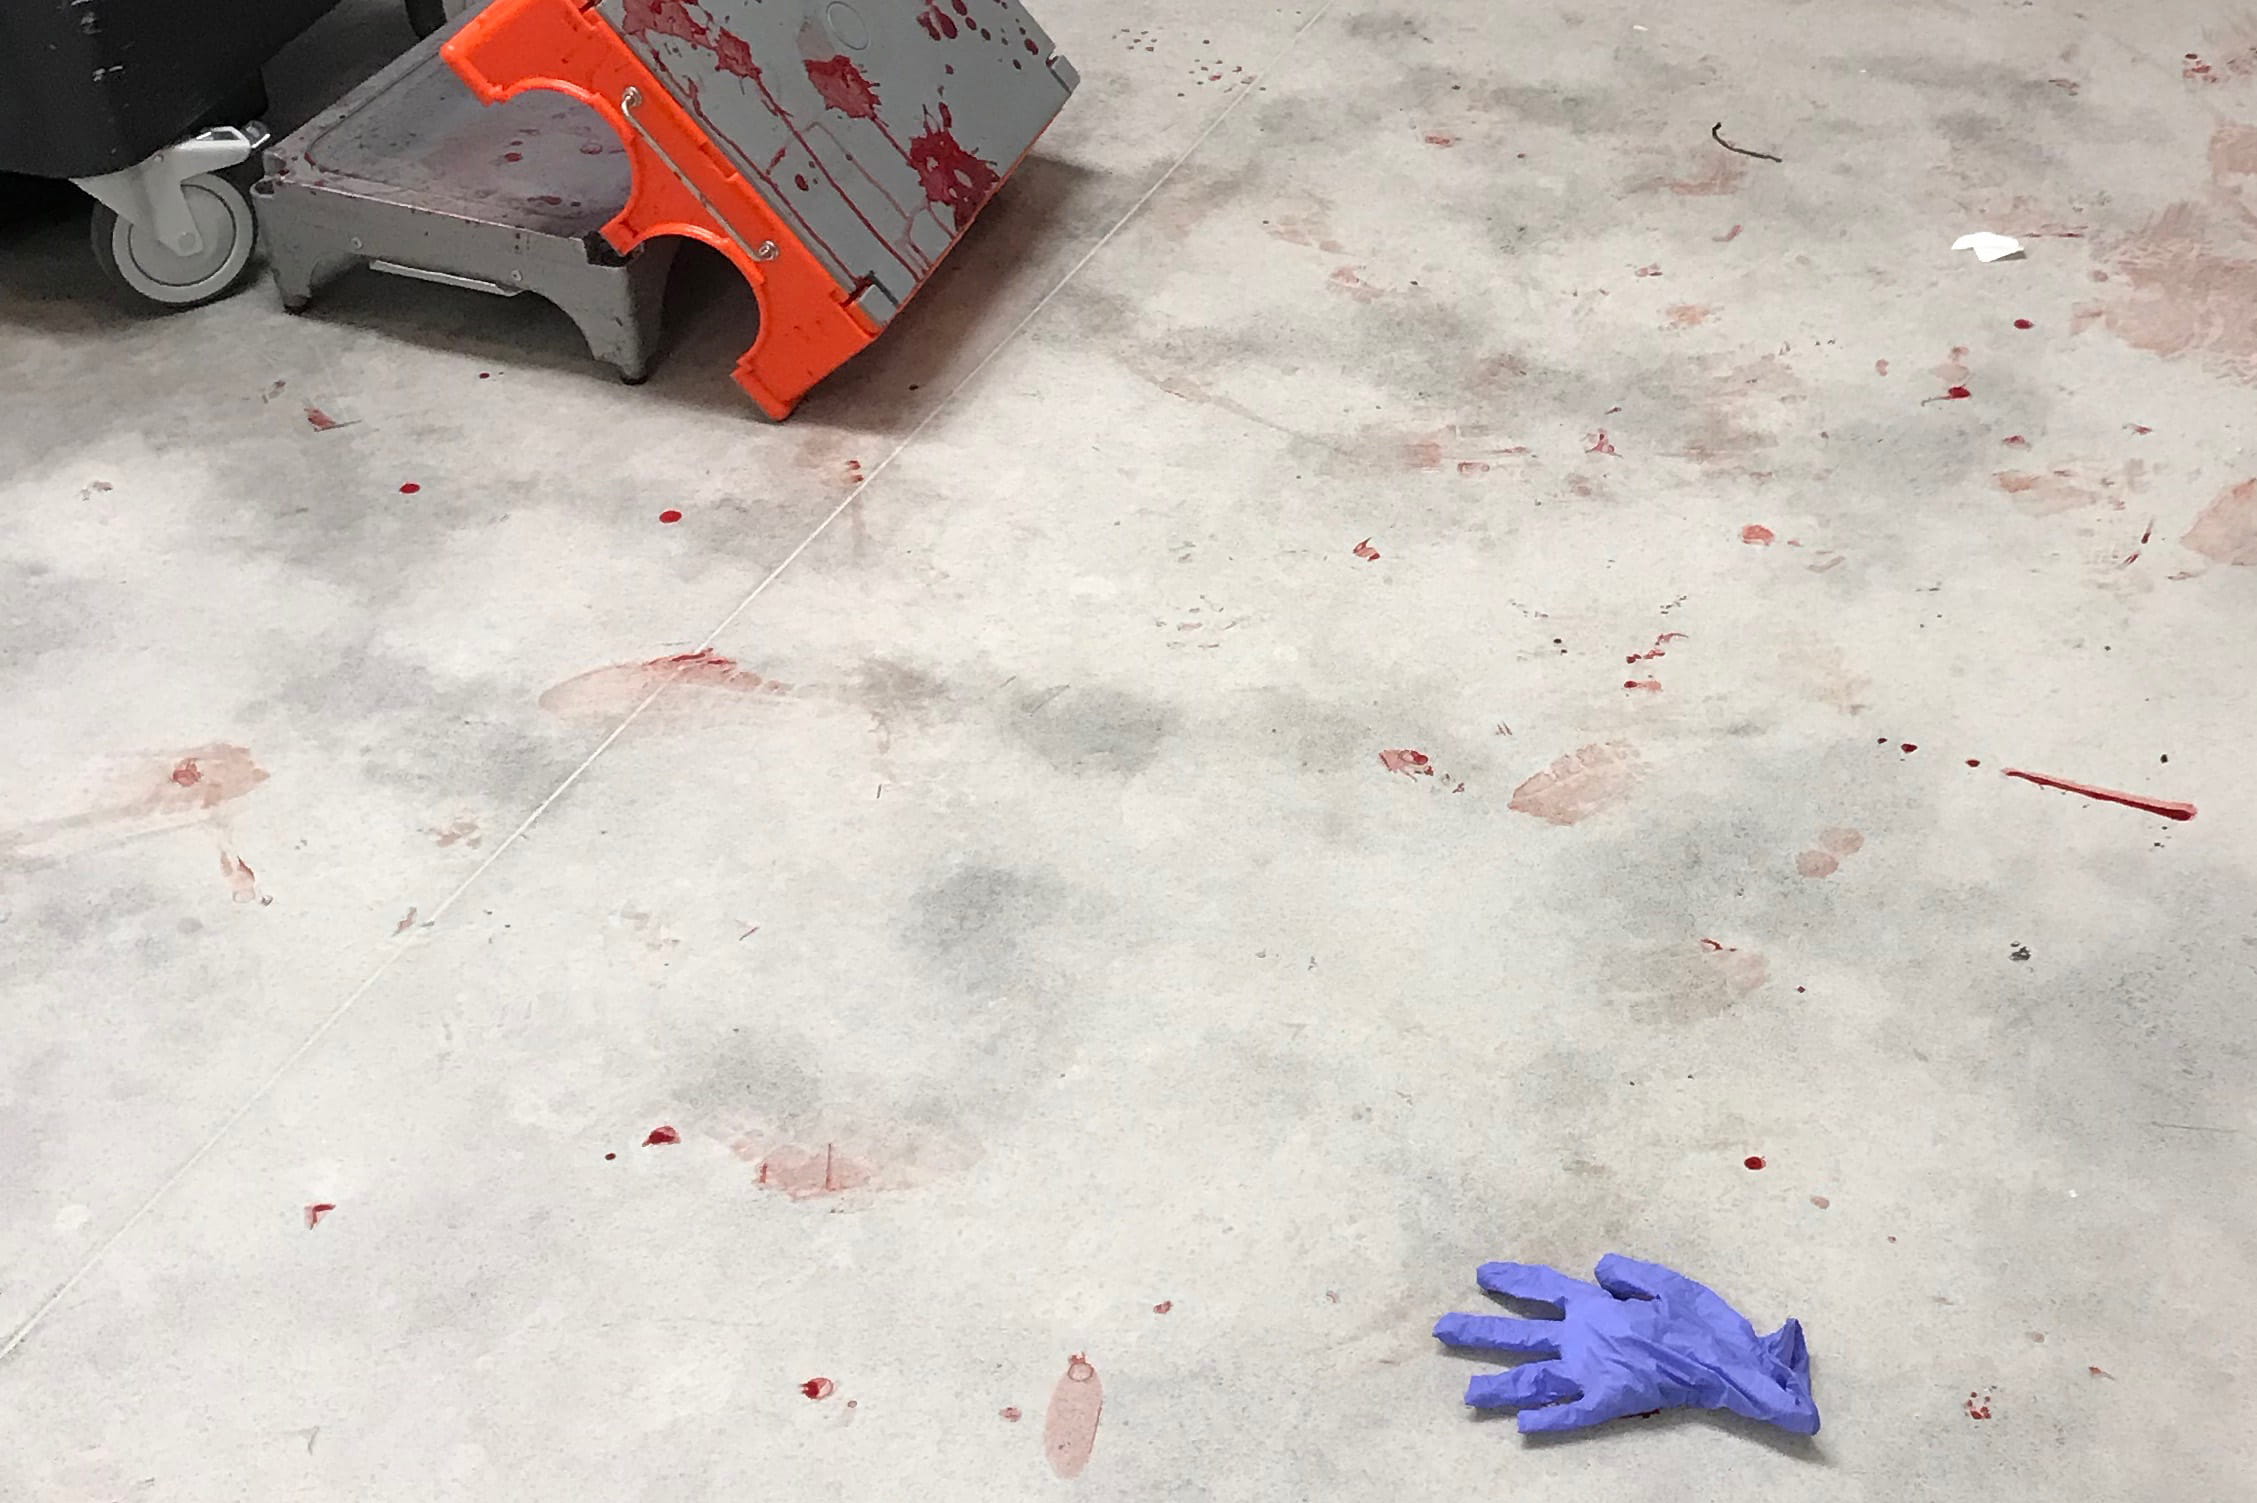 A lone latex glove on floor of OR